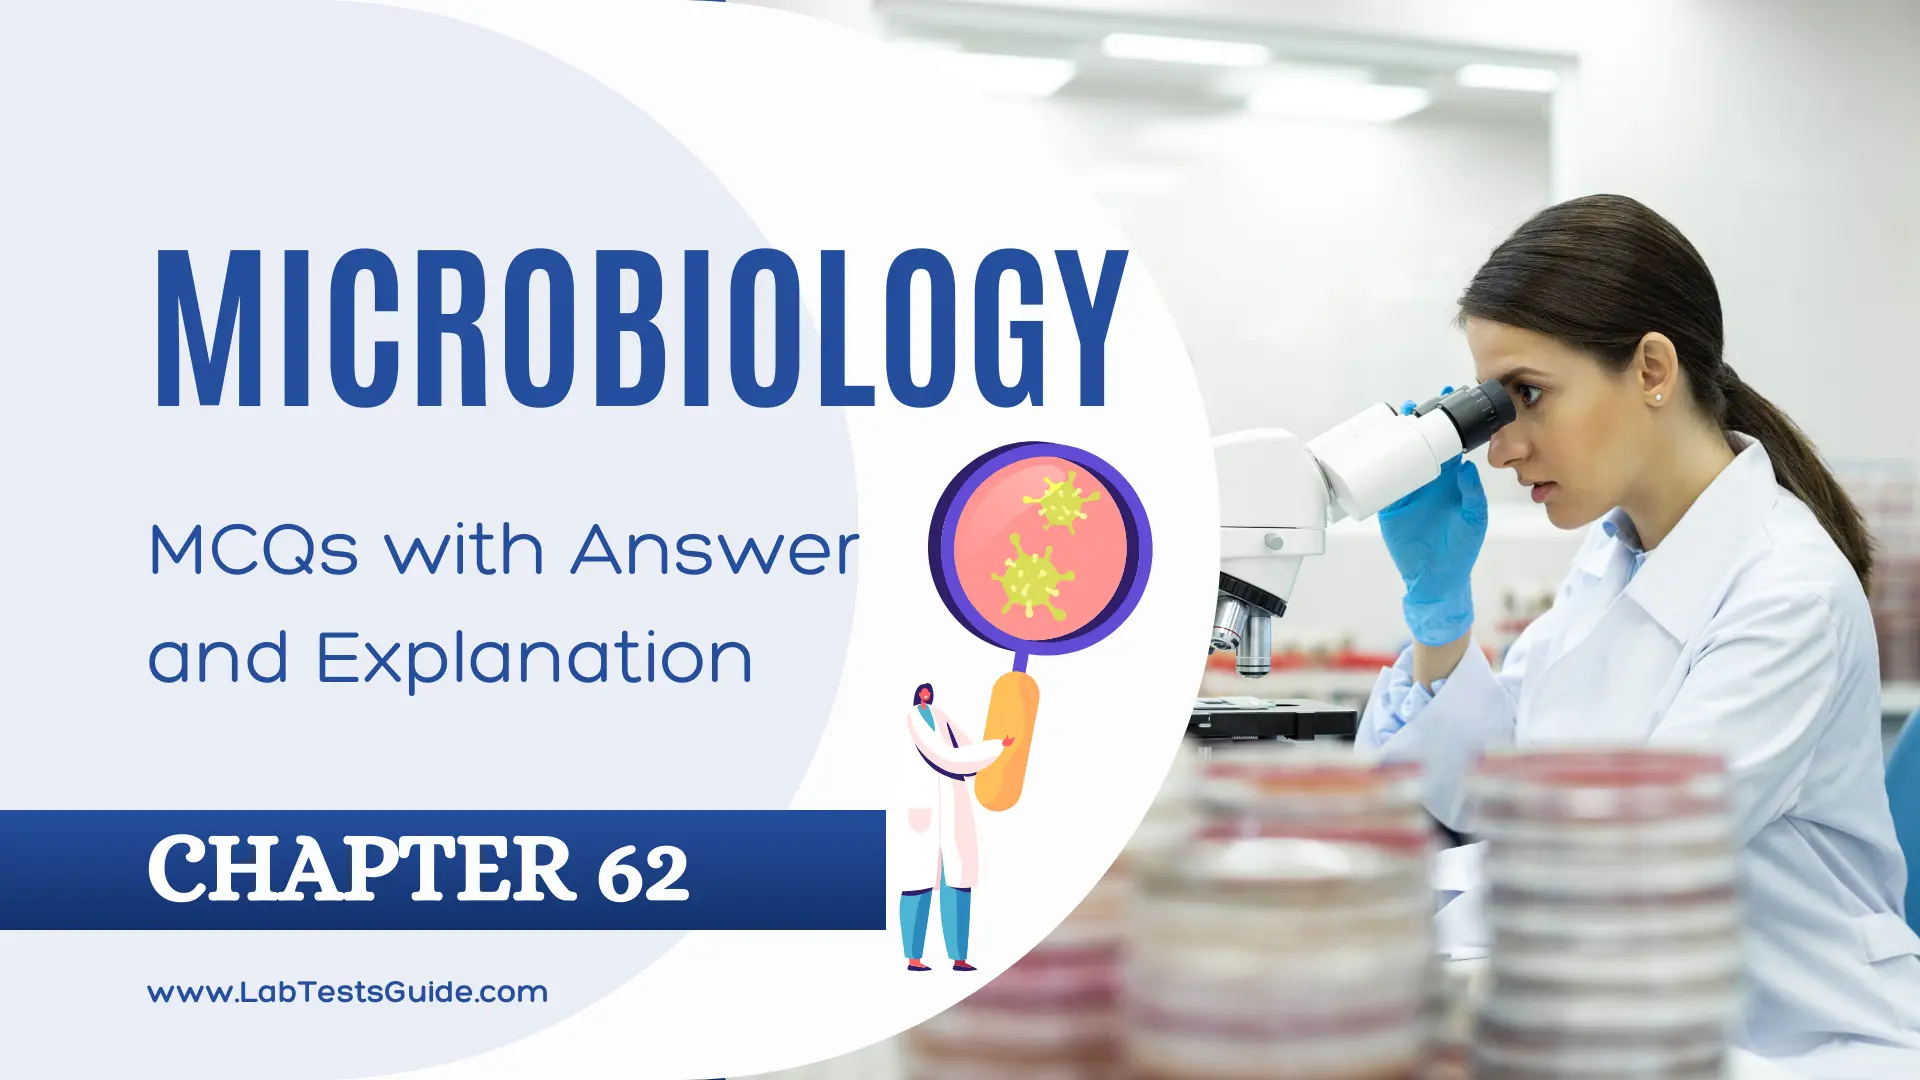 Microbiology MCQs Chapter 62